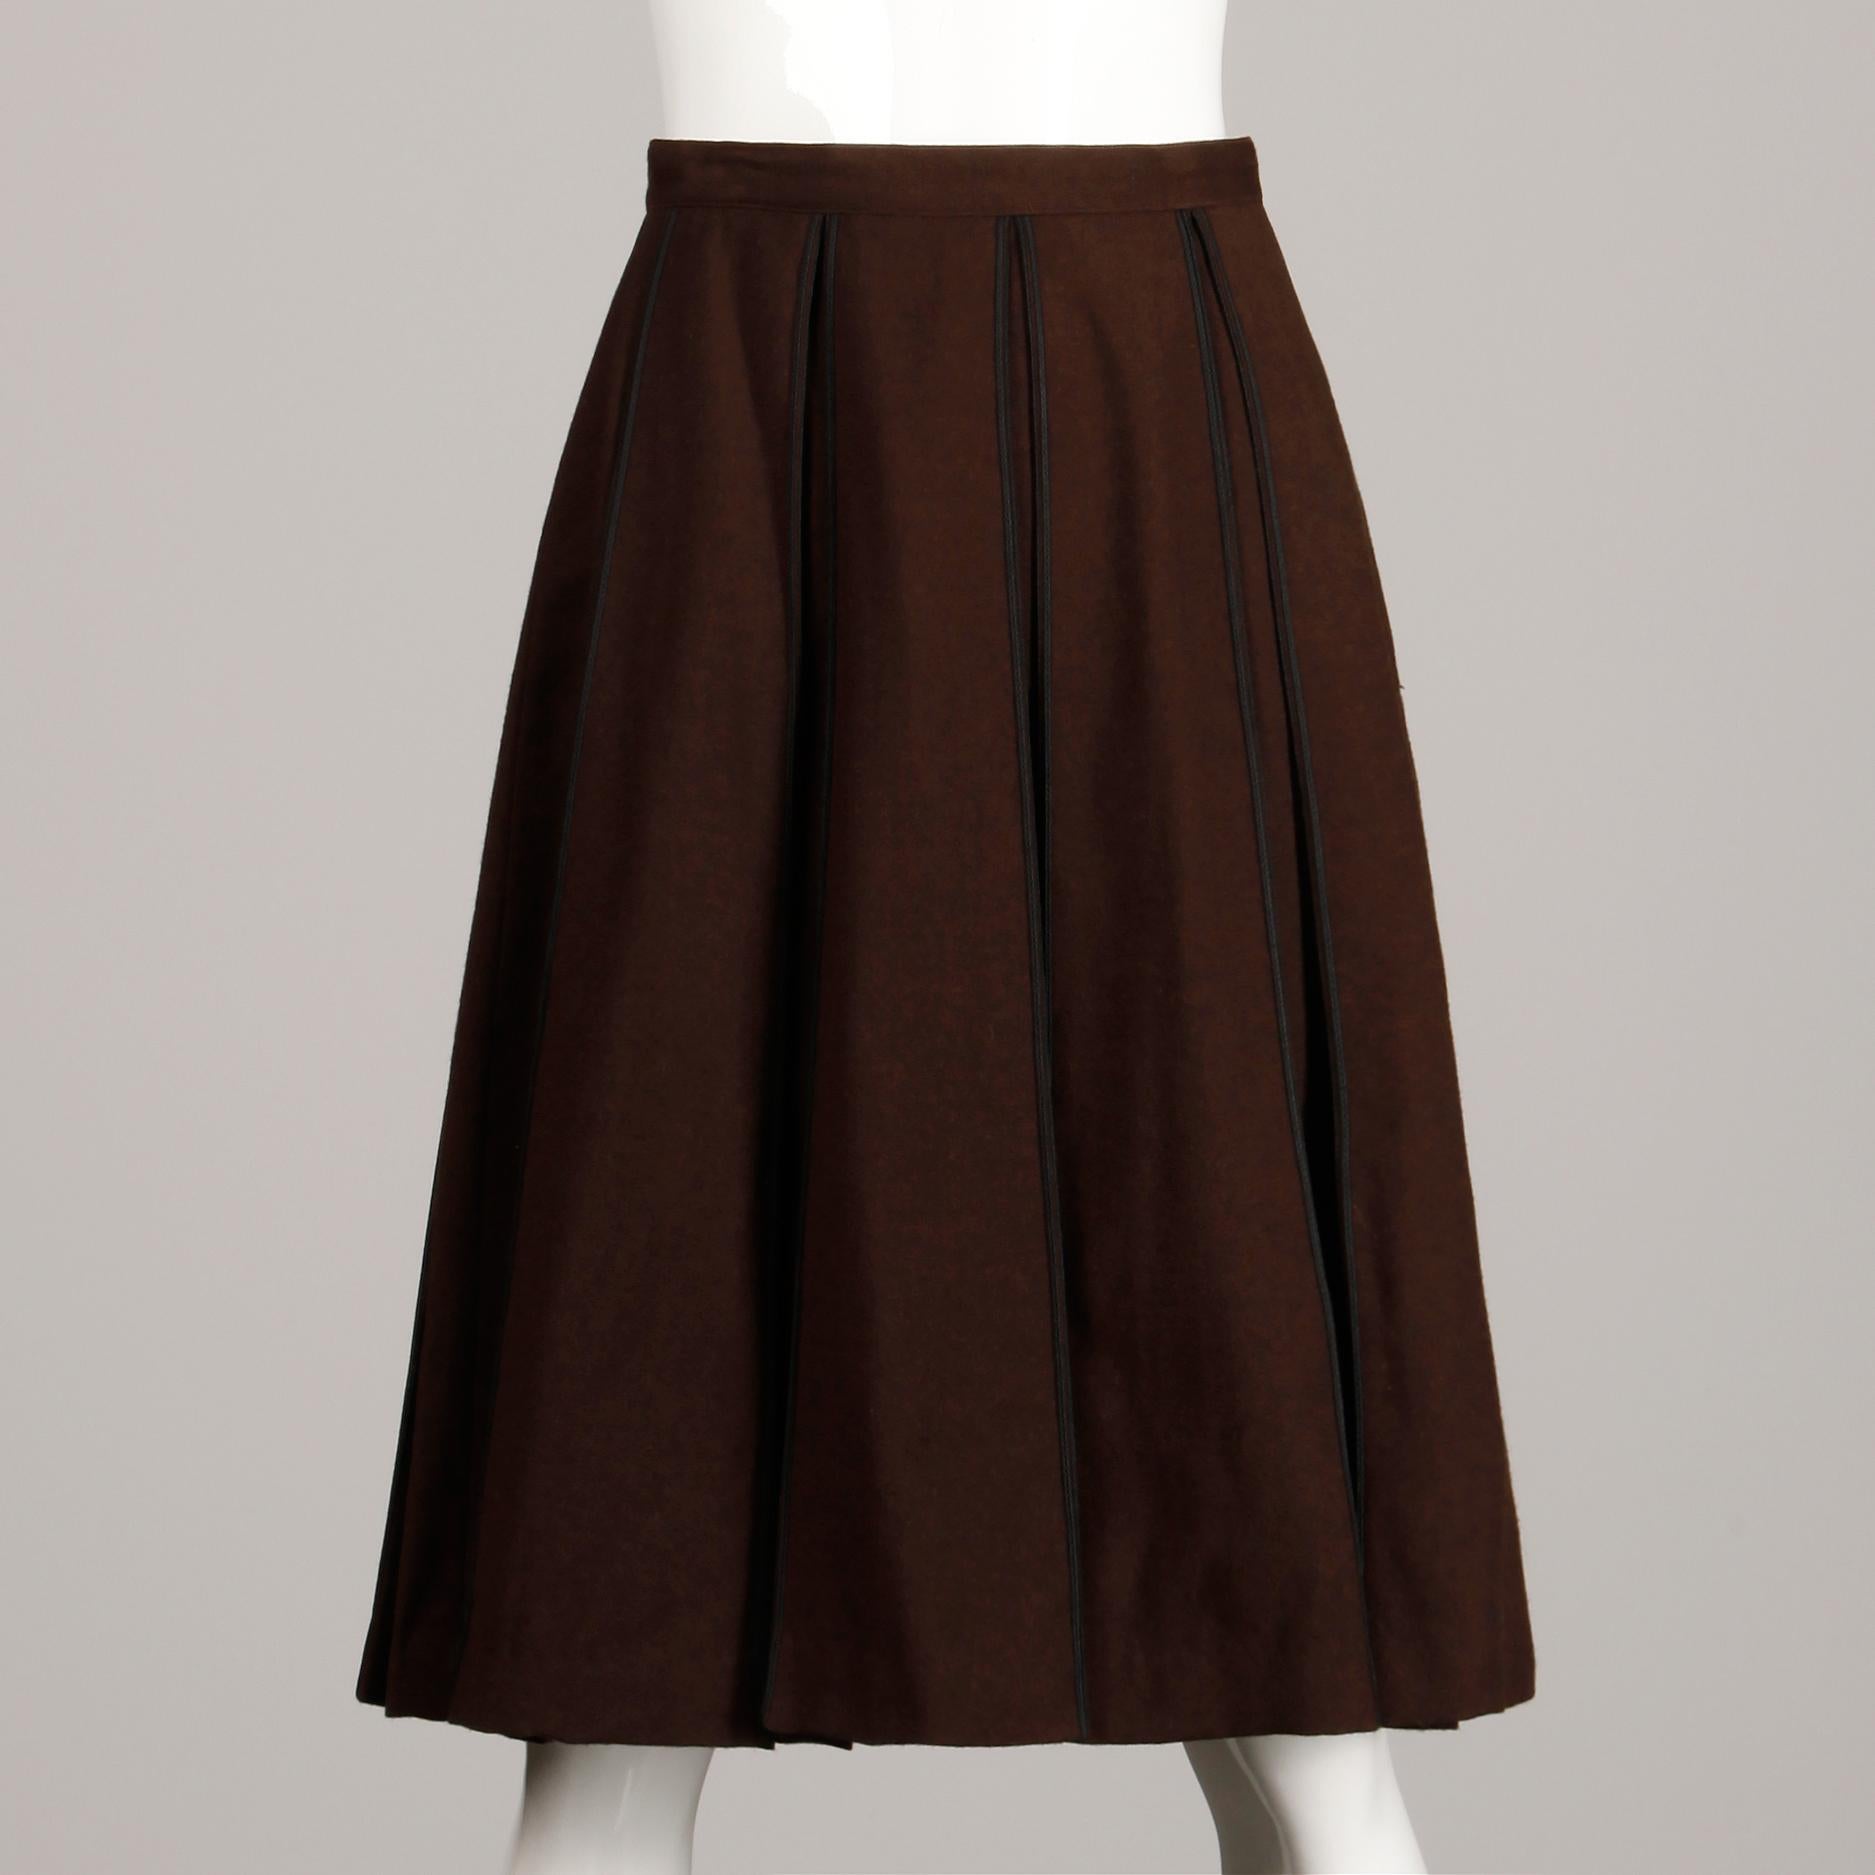 1960s B.H. Wragge Vintage Brown Wool Skirt with Box Pleats + Black Cord Trim In Excellent Condition For Sale In Sparks, NV